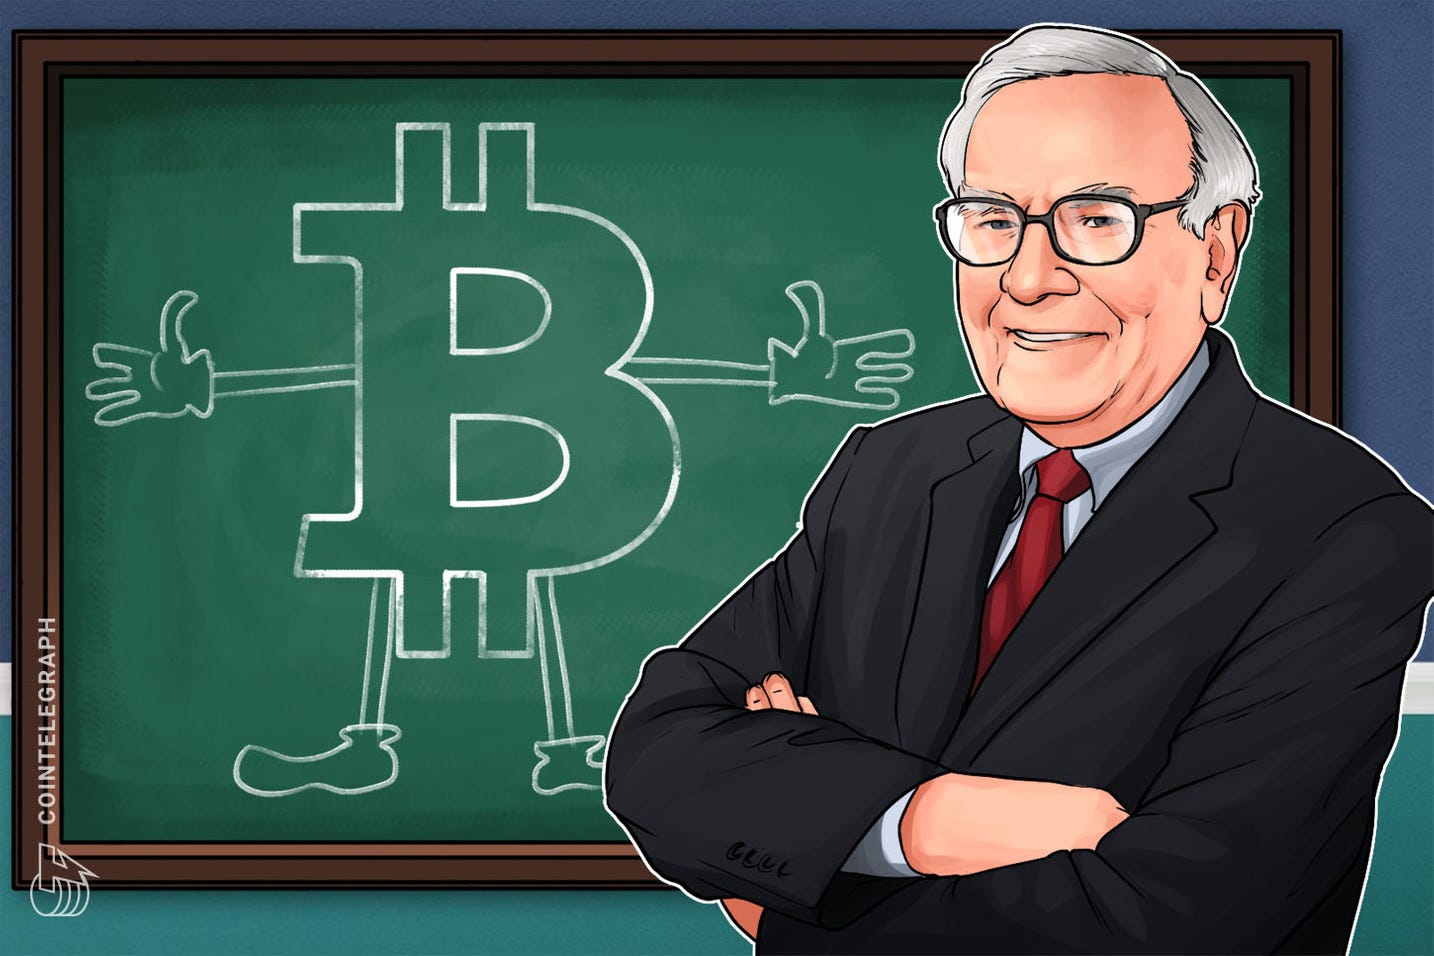 Warren Buffett Doesn't Want to Own any Cryptocurrency